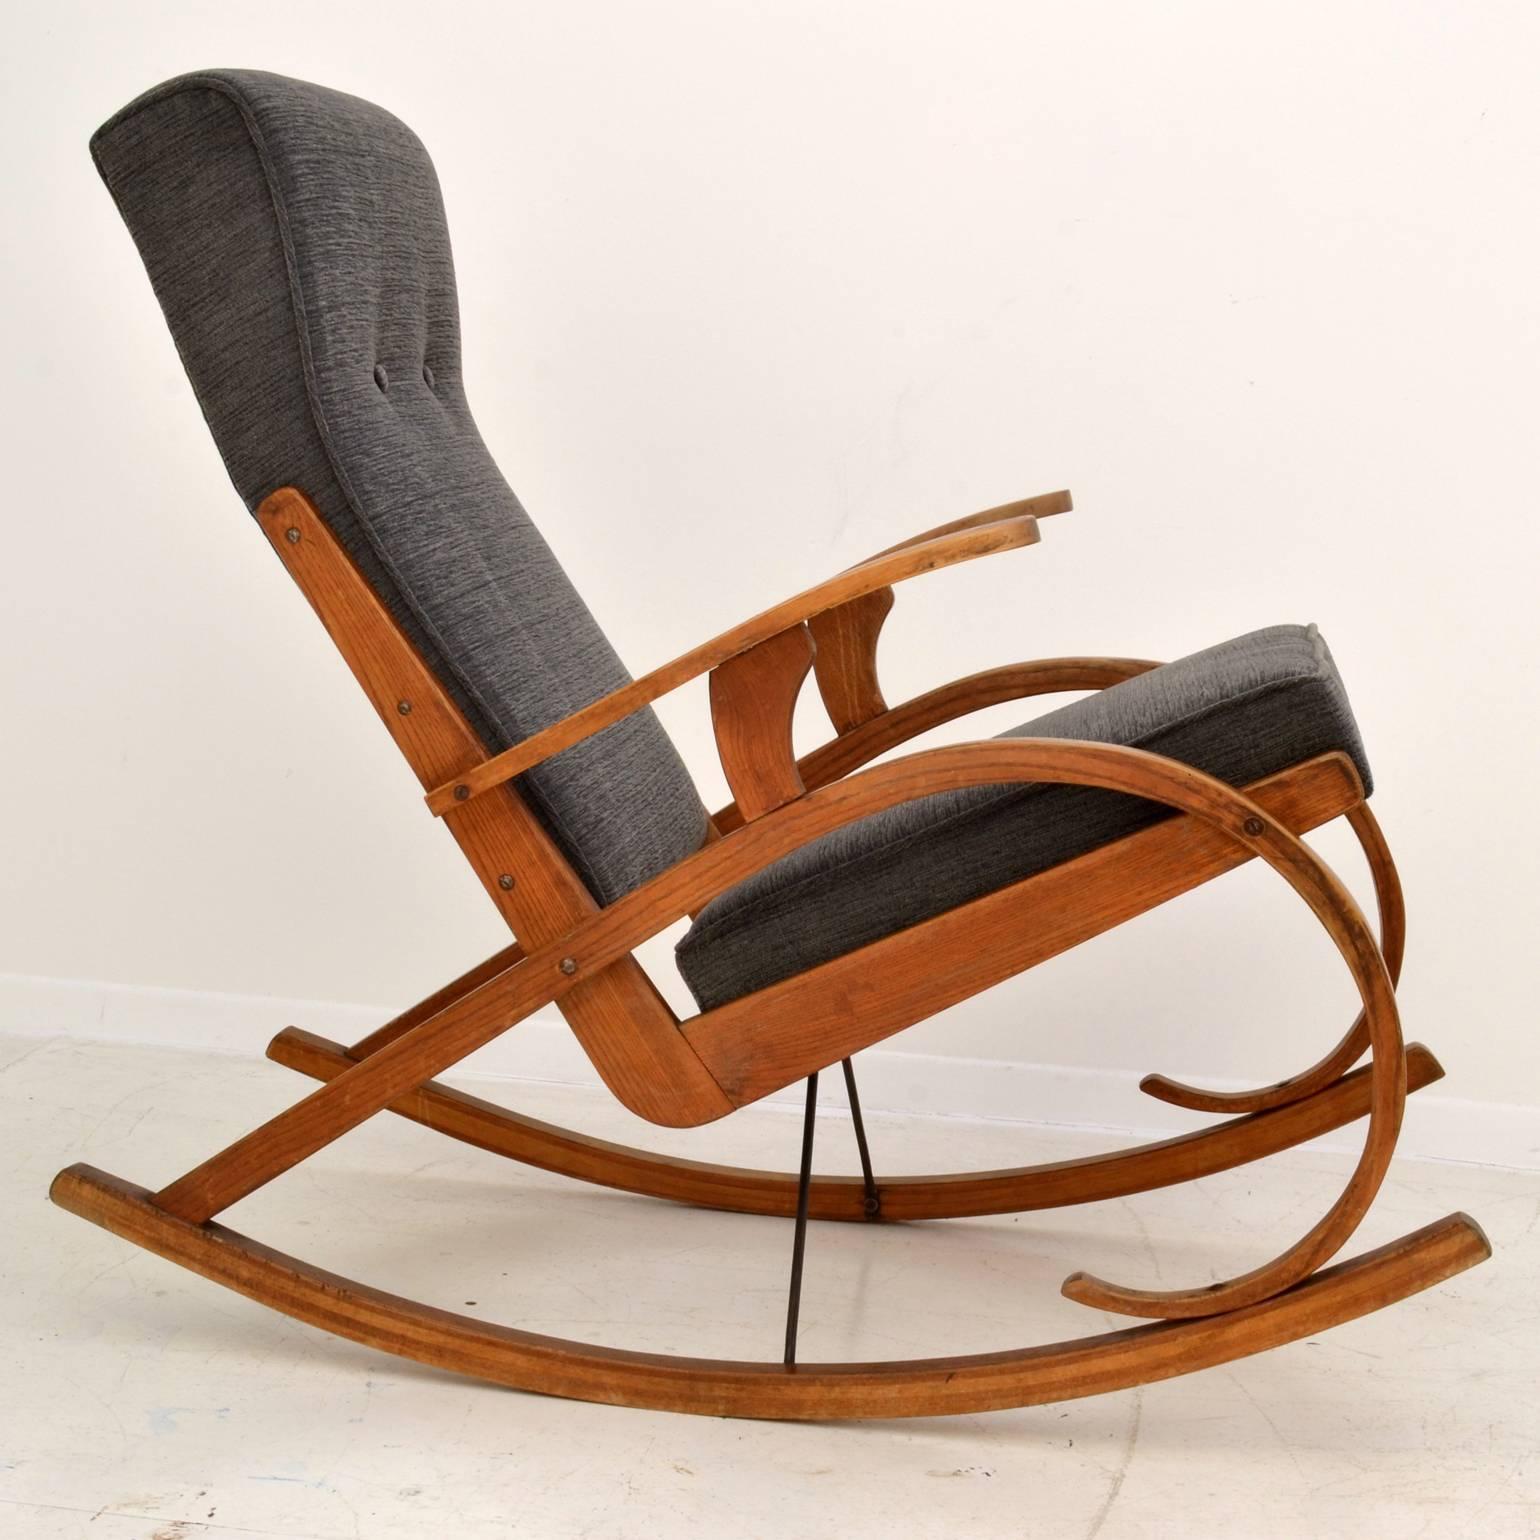 Czech 1930s rocking chair with frame in bent oak wood with strong lines, reupholstered in a warm grey fabric of the period.
The chair is extremely comfortable, great back support and sublime movement for active sitting or